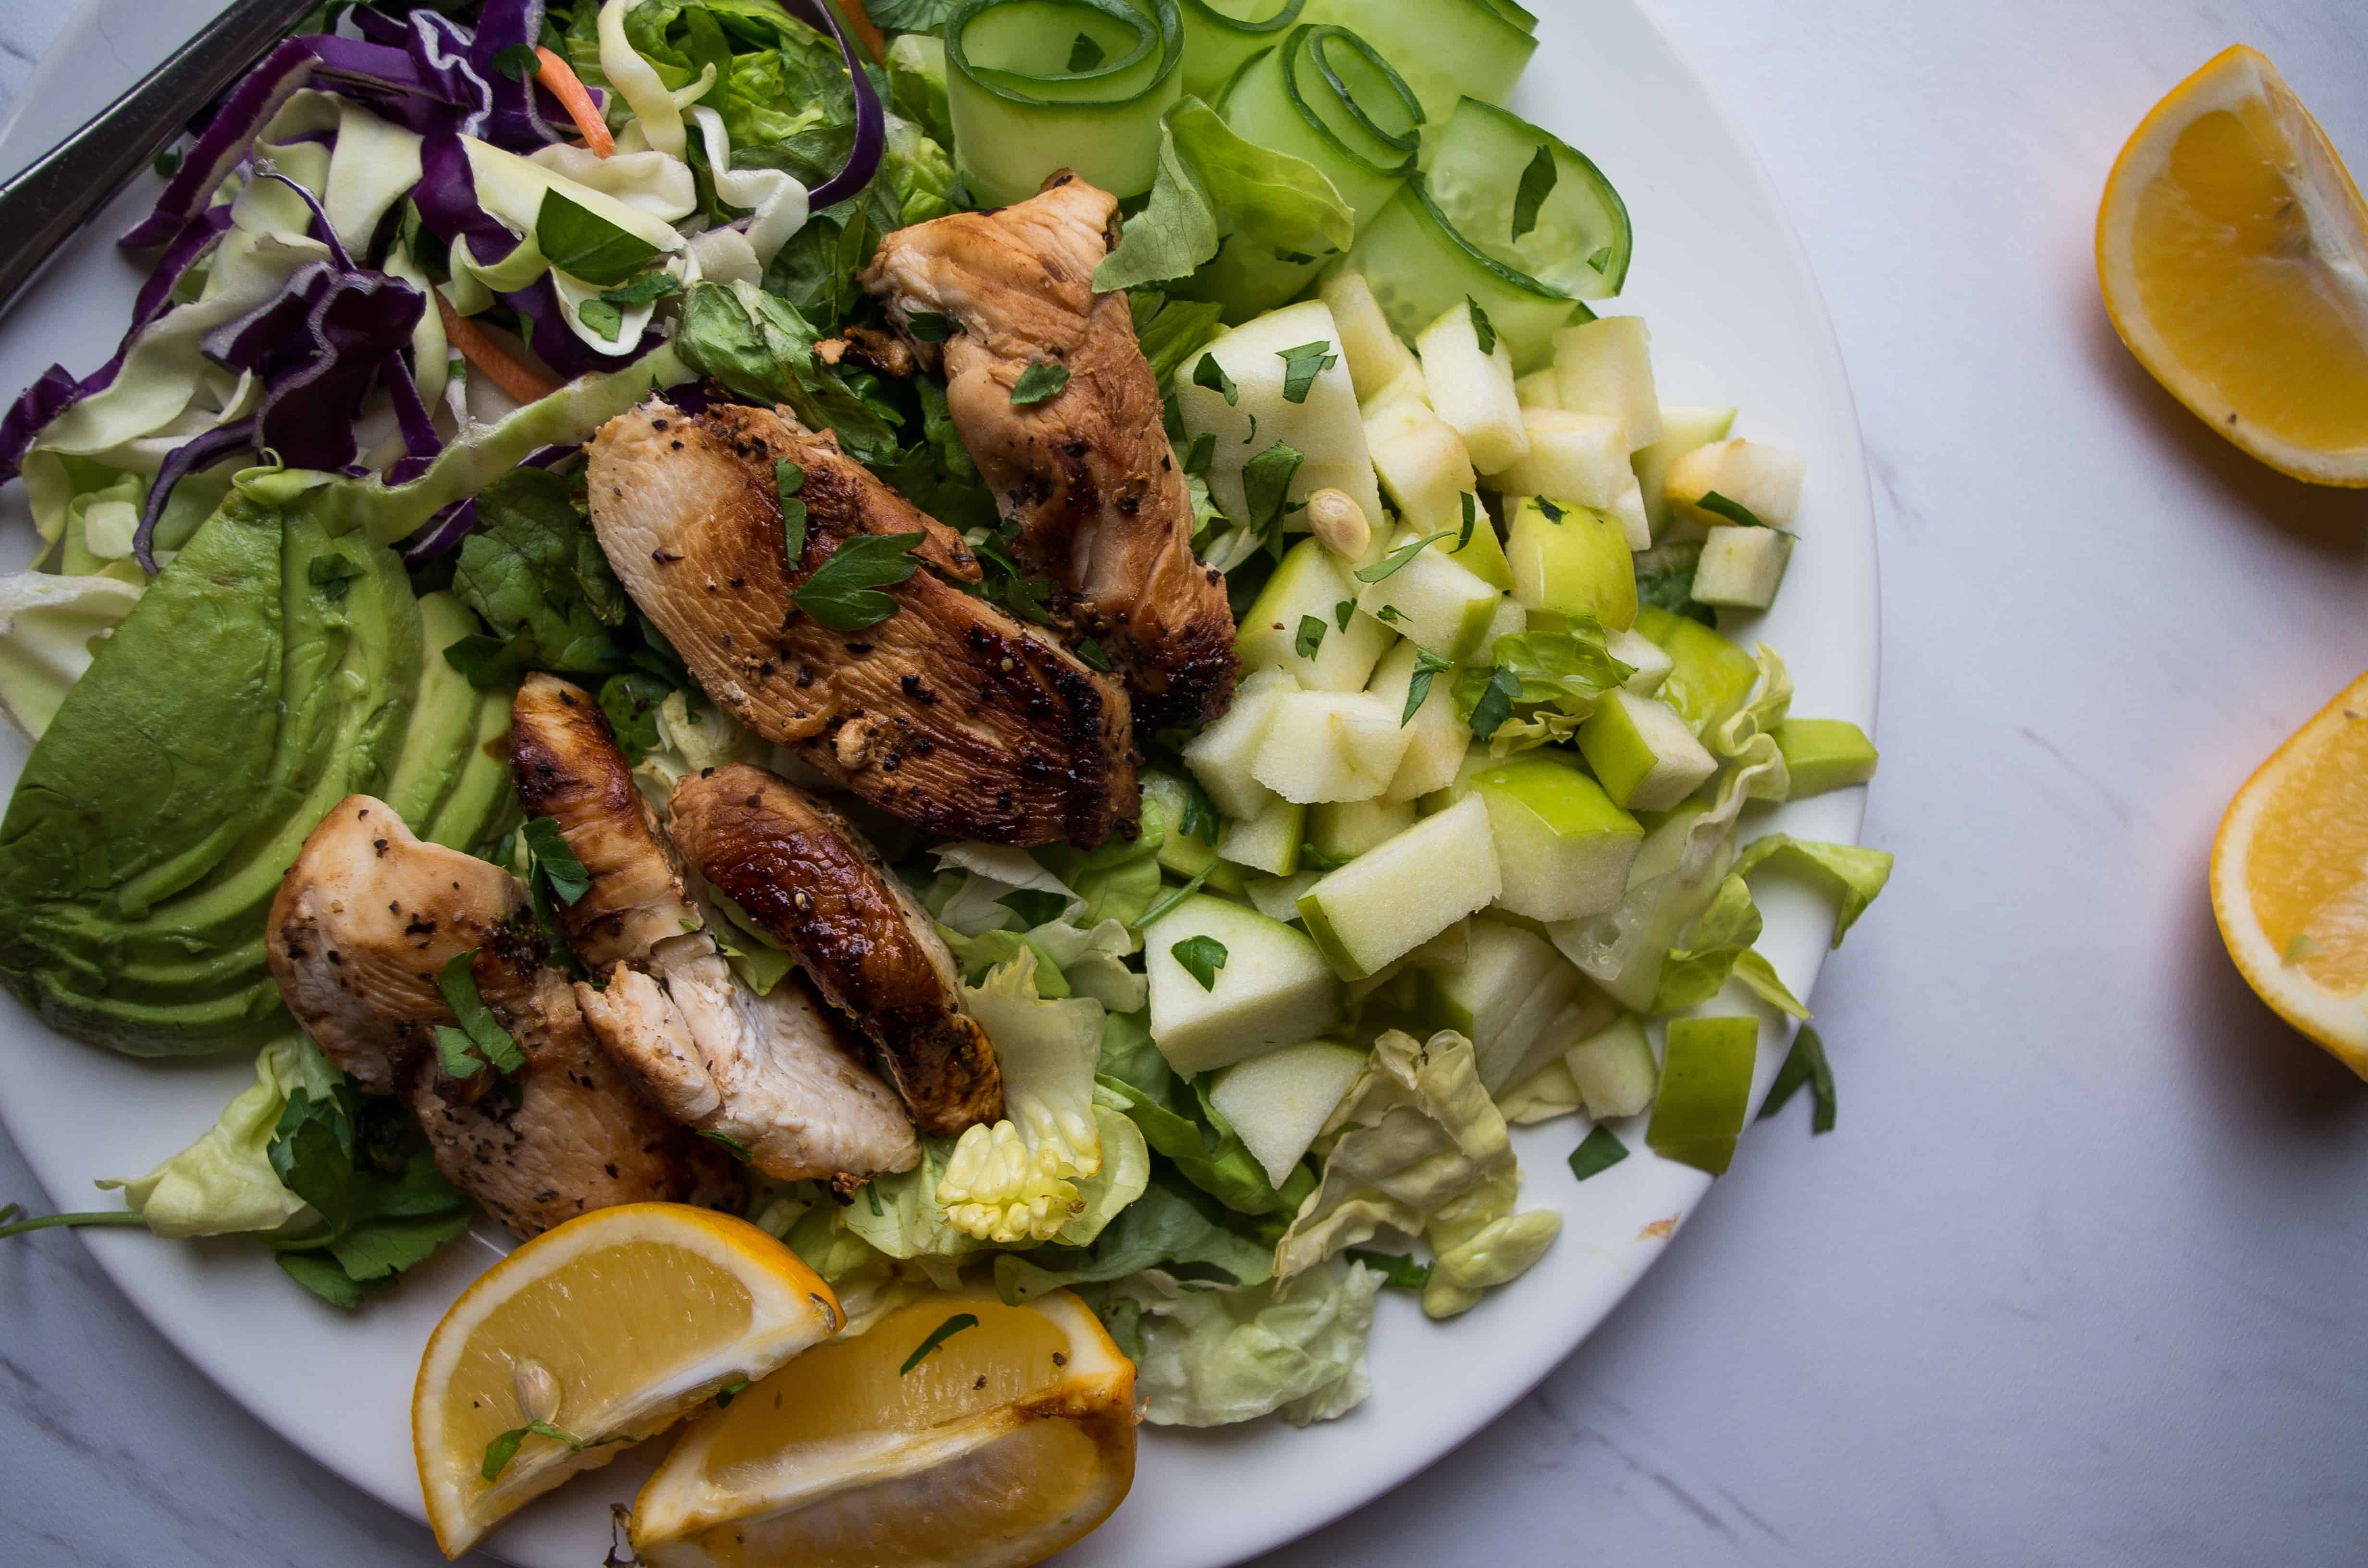 An herby, protein-packed power salad featuring all the green things, apples, avocados, and caramelized lemony chicken for your new go to Spring salad recipe! |thekitcheneer.com